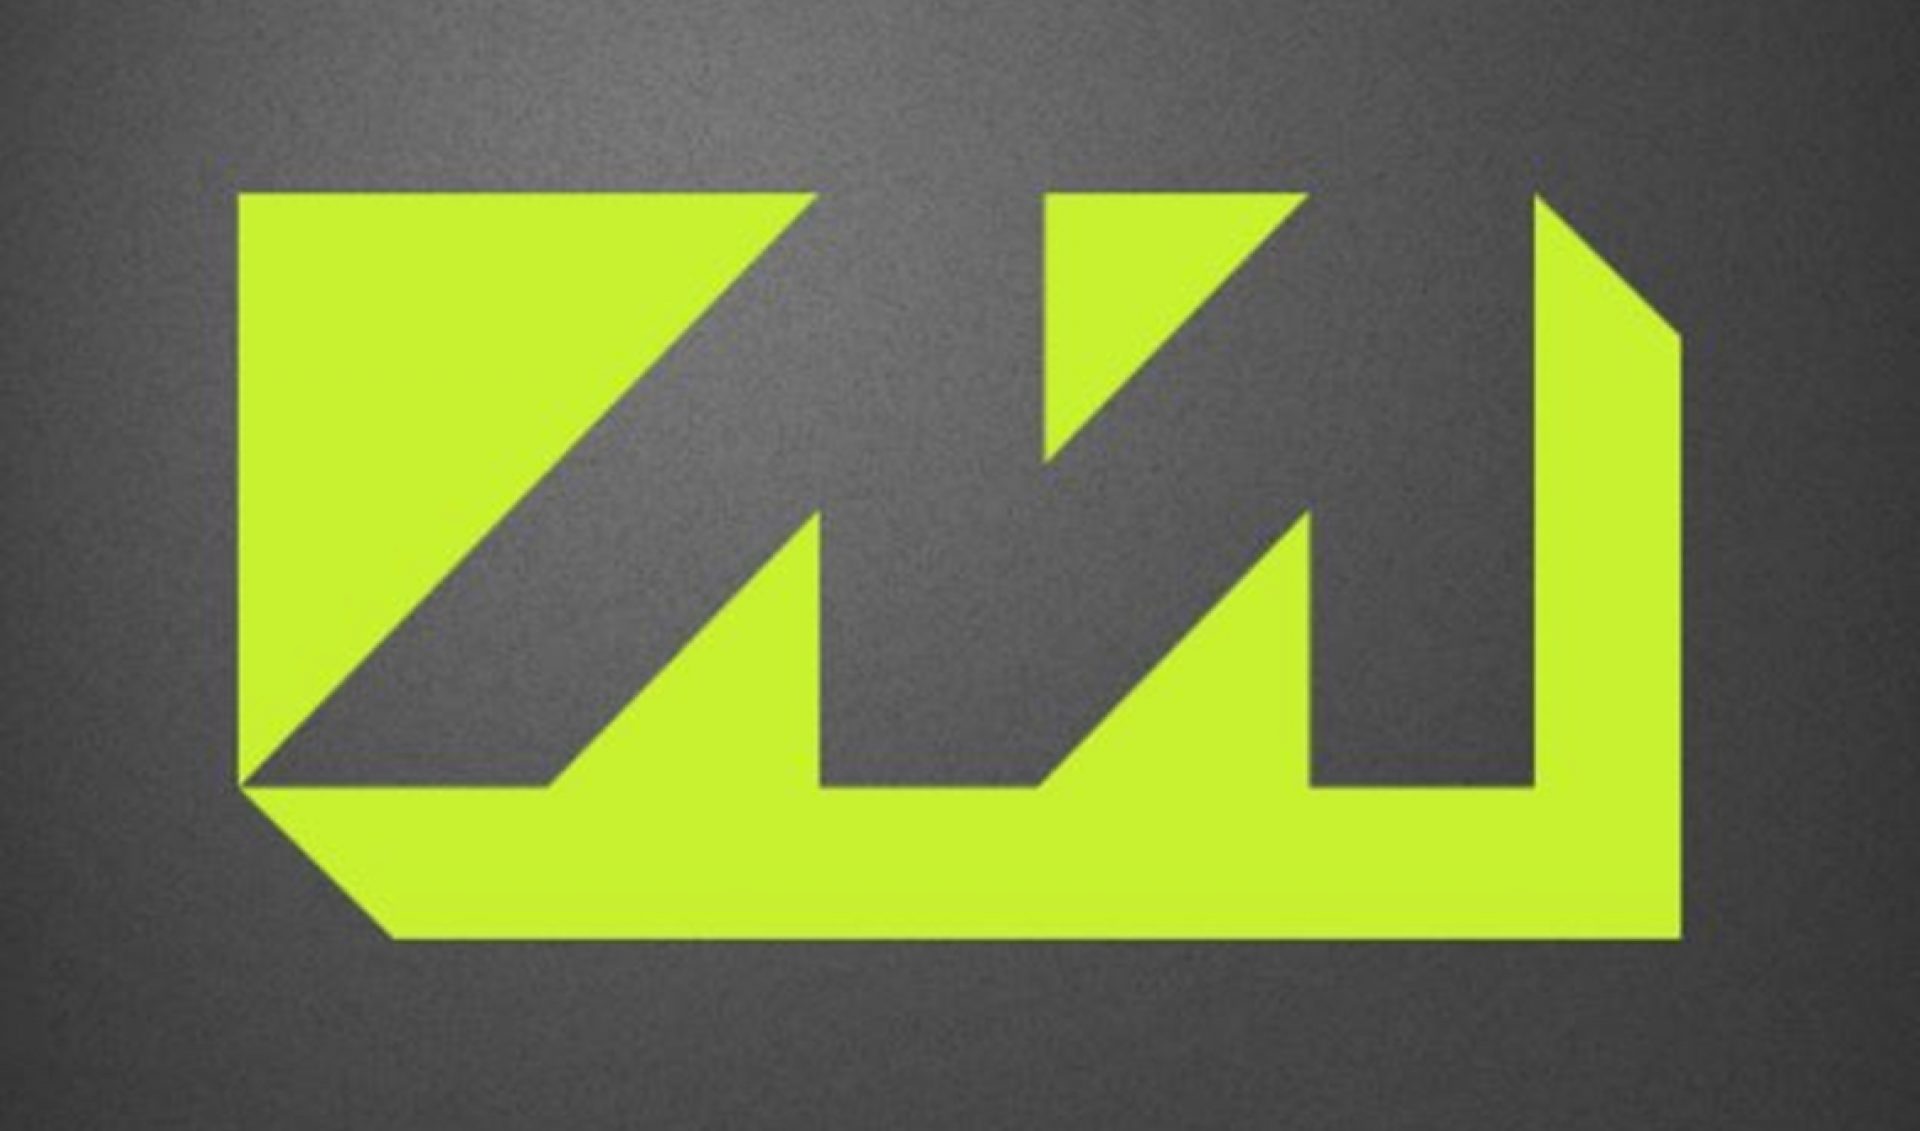 Machinima Ceases All Consumer-Facing Operations, Lays Off Most Of Staff